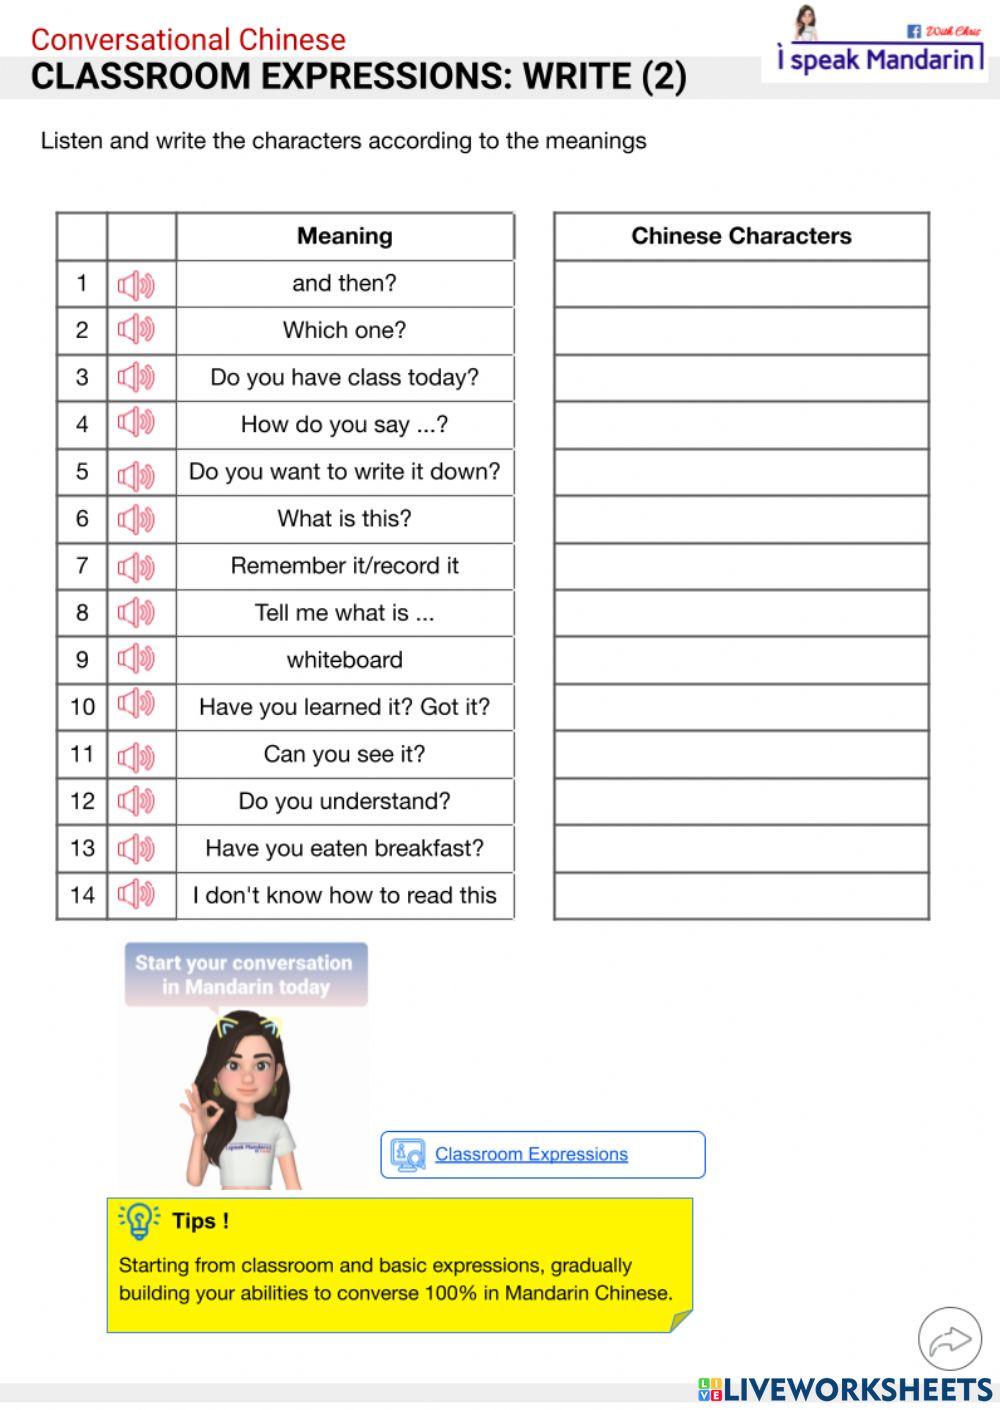 Classroom expressions: write (2)